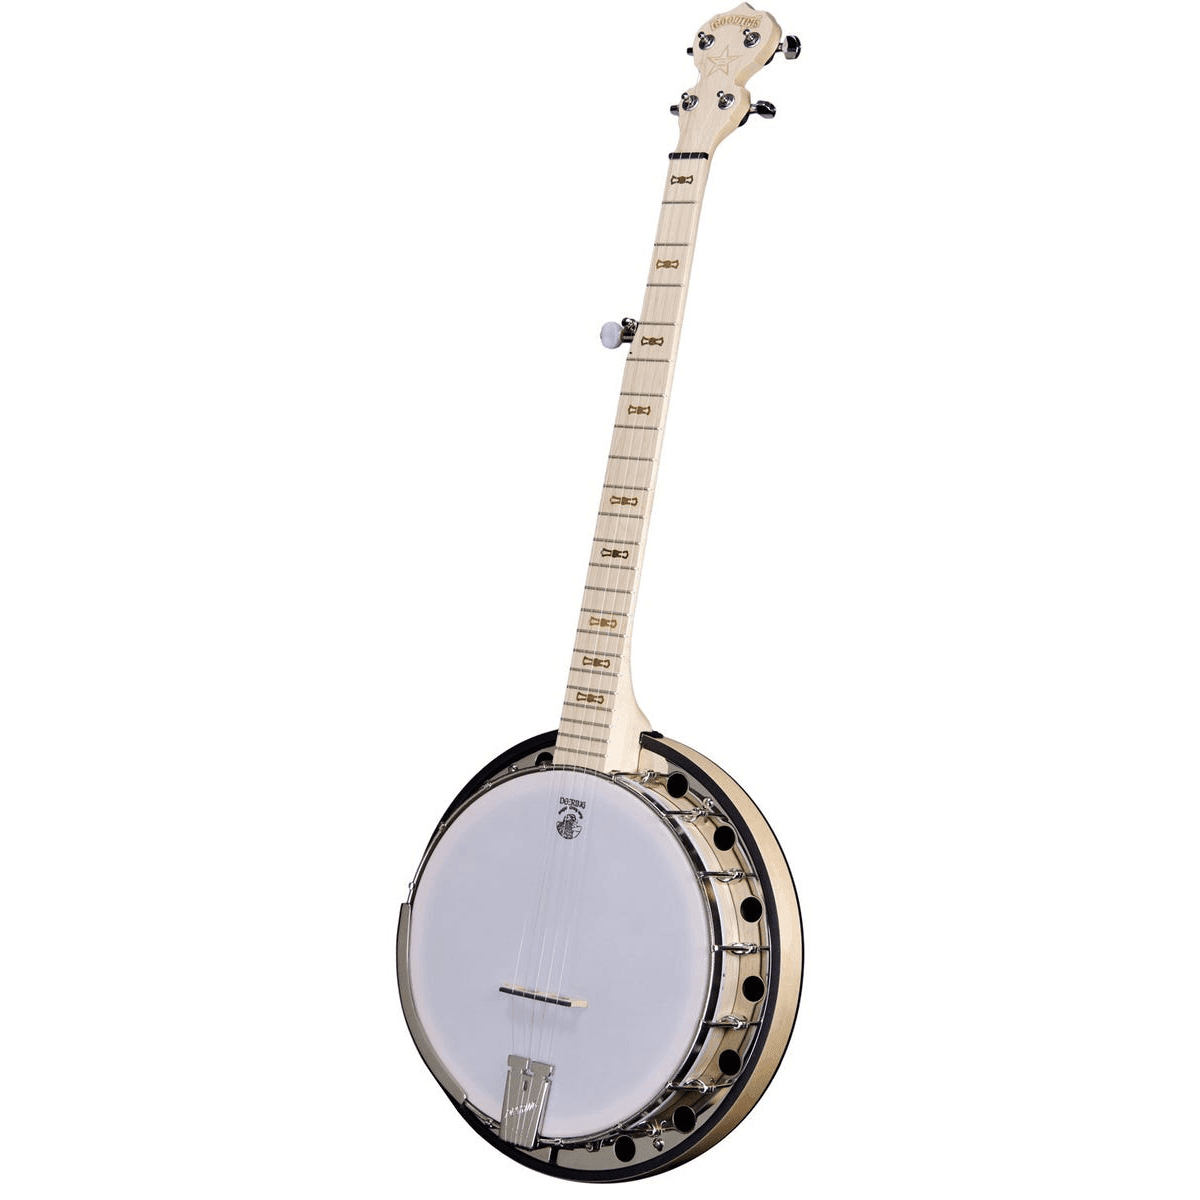 Goodtime 2 5 Strings With Resonator - Banjos by Deering at Muso's Stuff